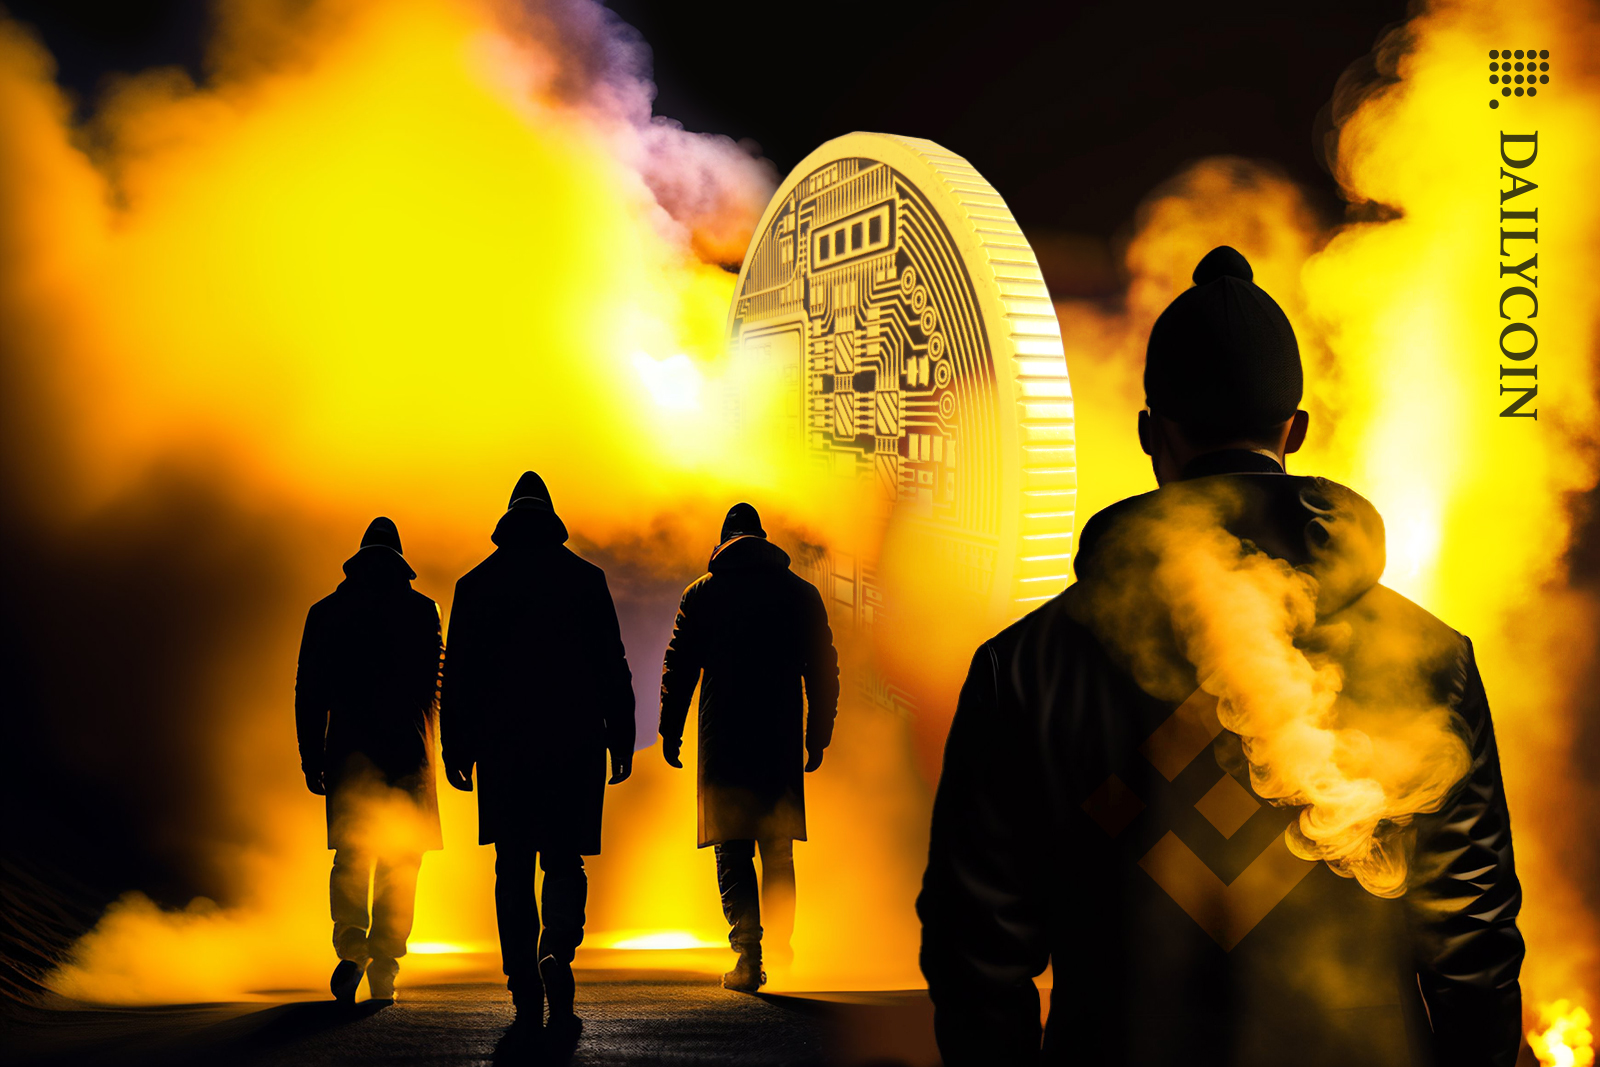 A group of humans walking towards Binance coin in smoke.